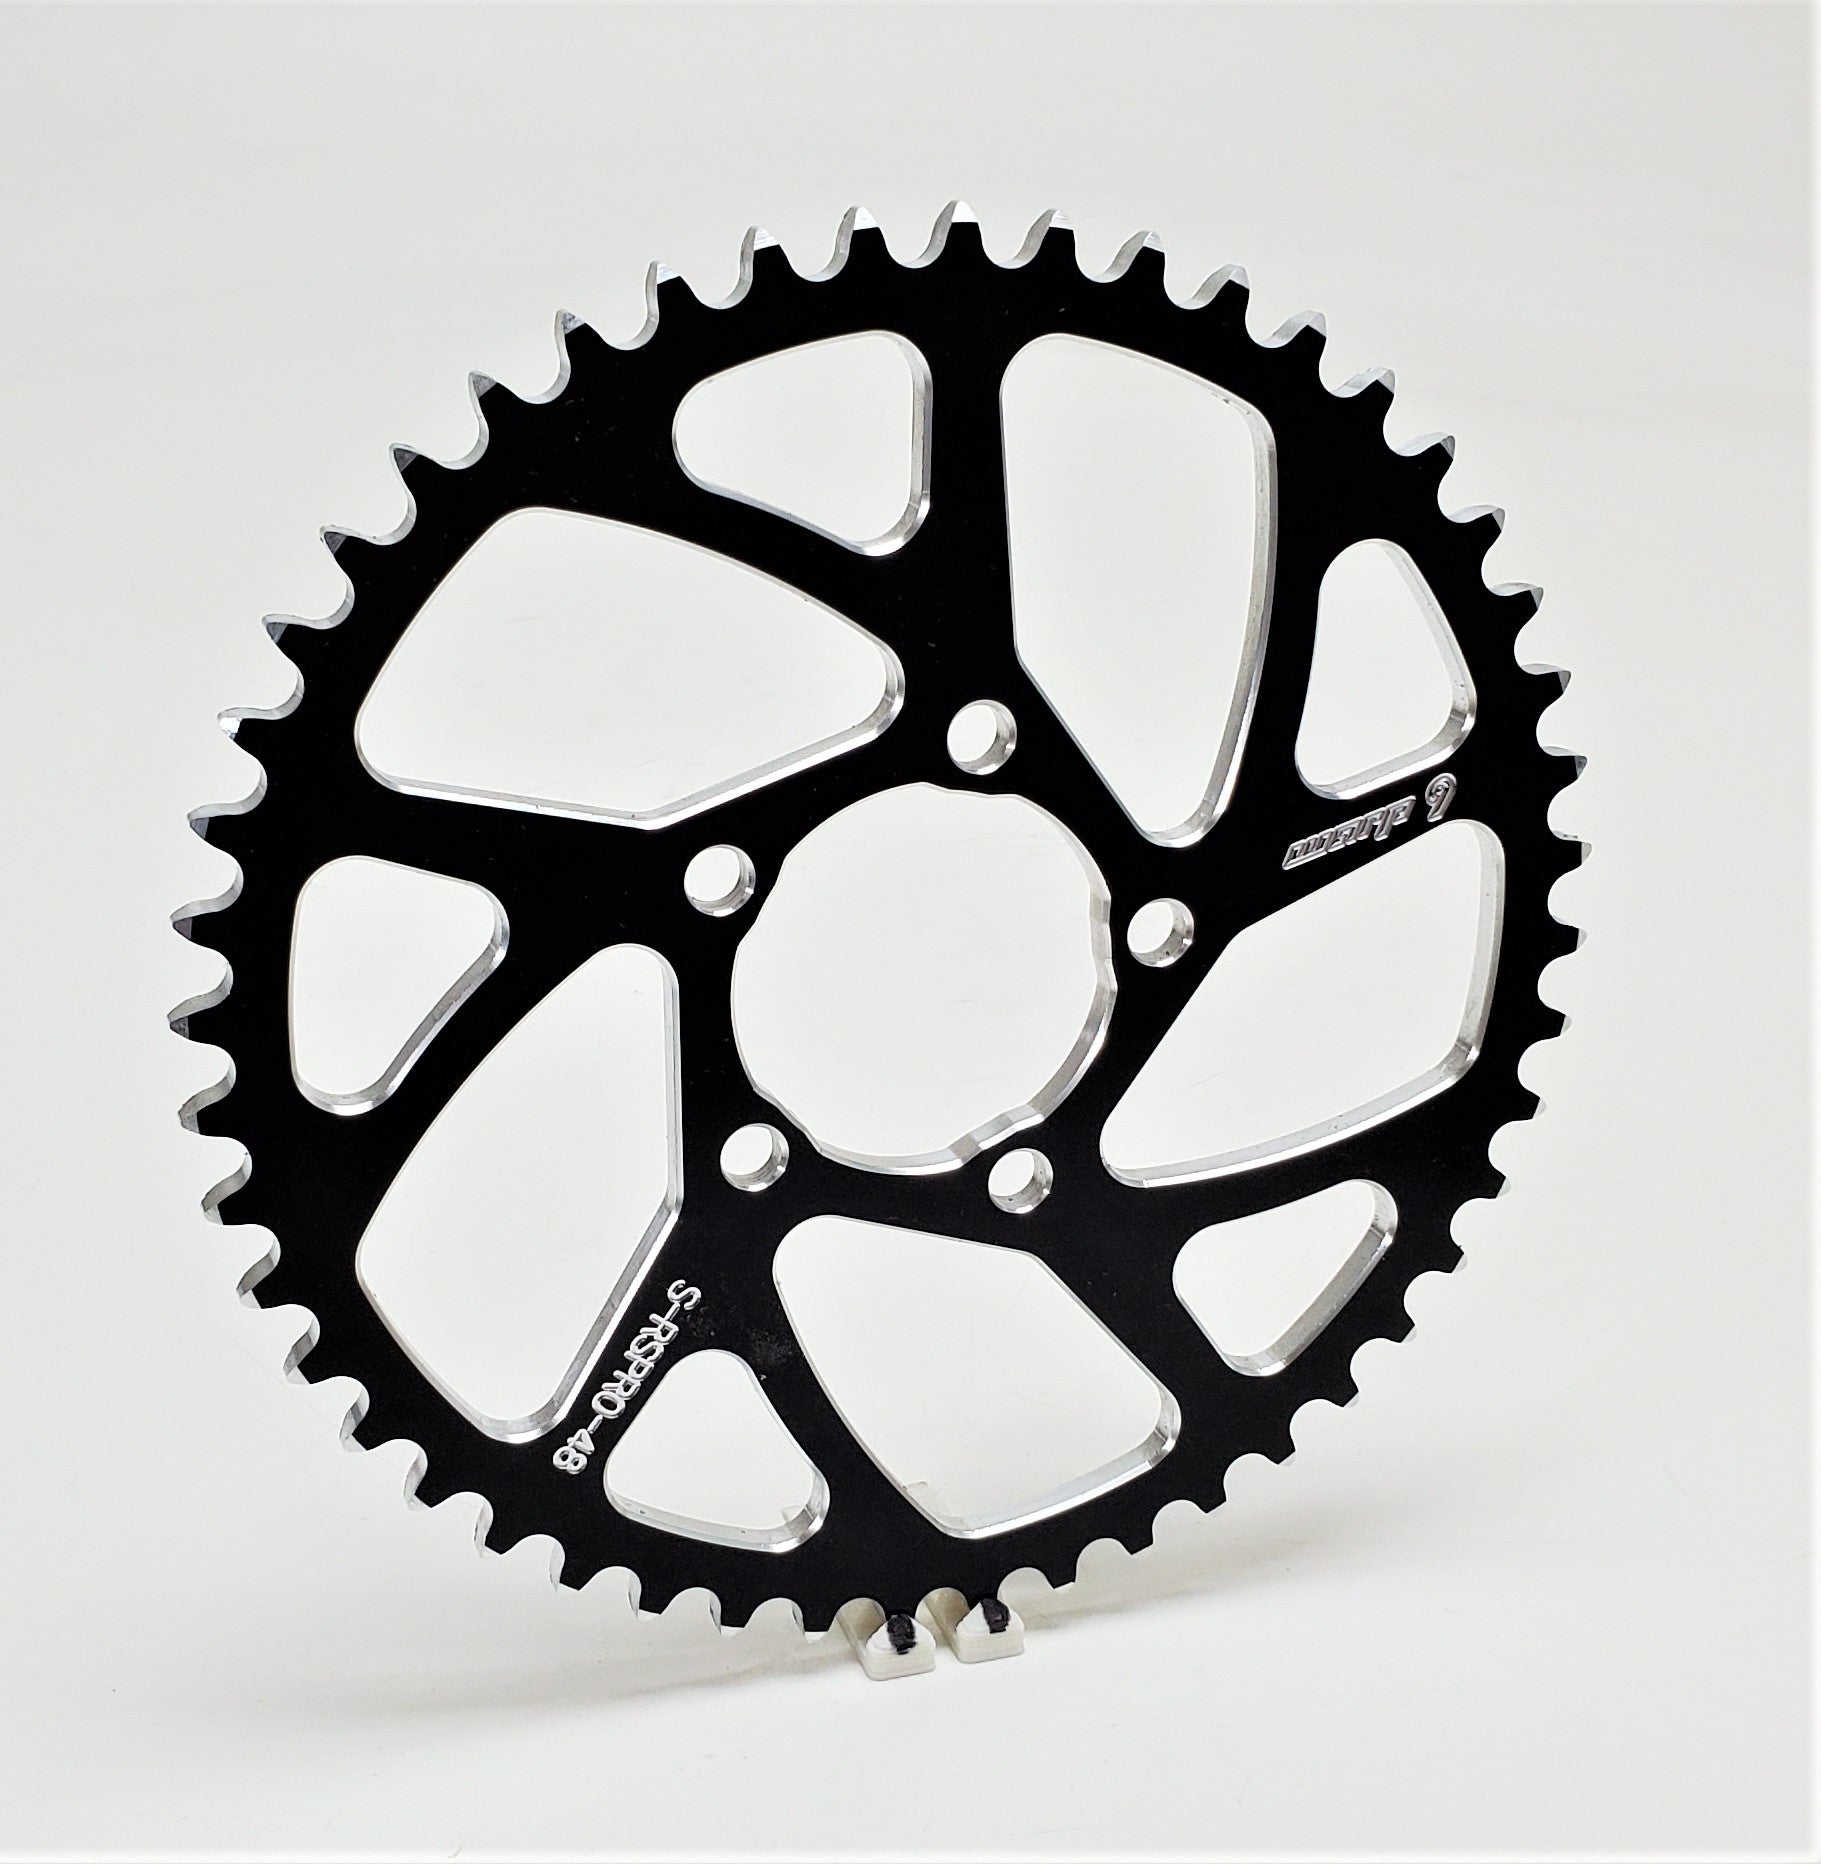 Warp 9 48 tooth sprocket for Surron Lightbee X and Talaria Sting